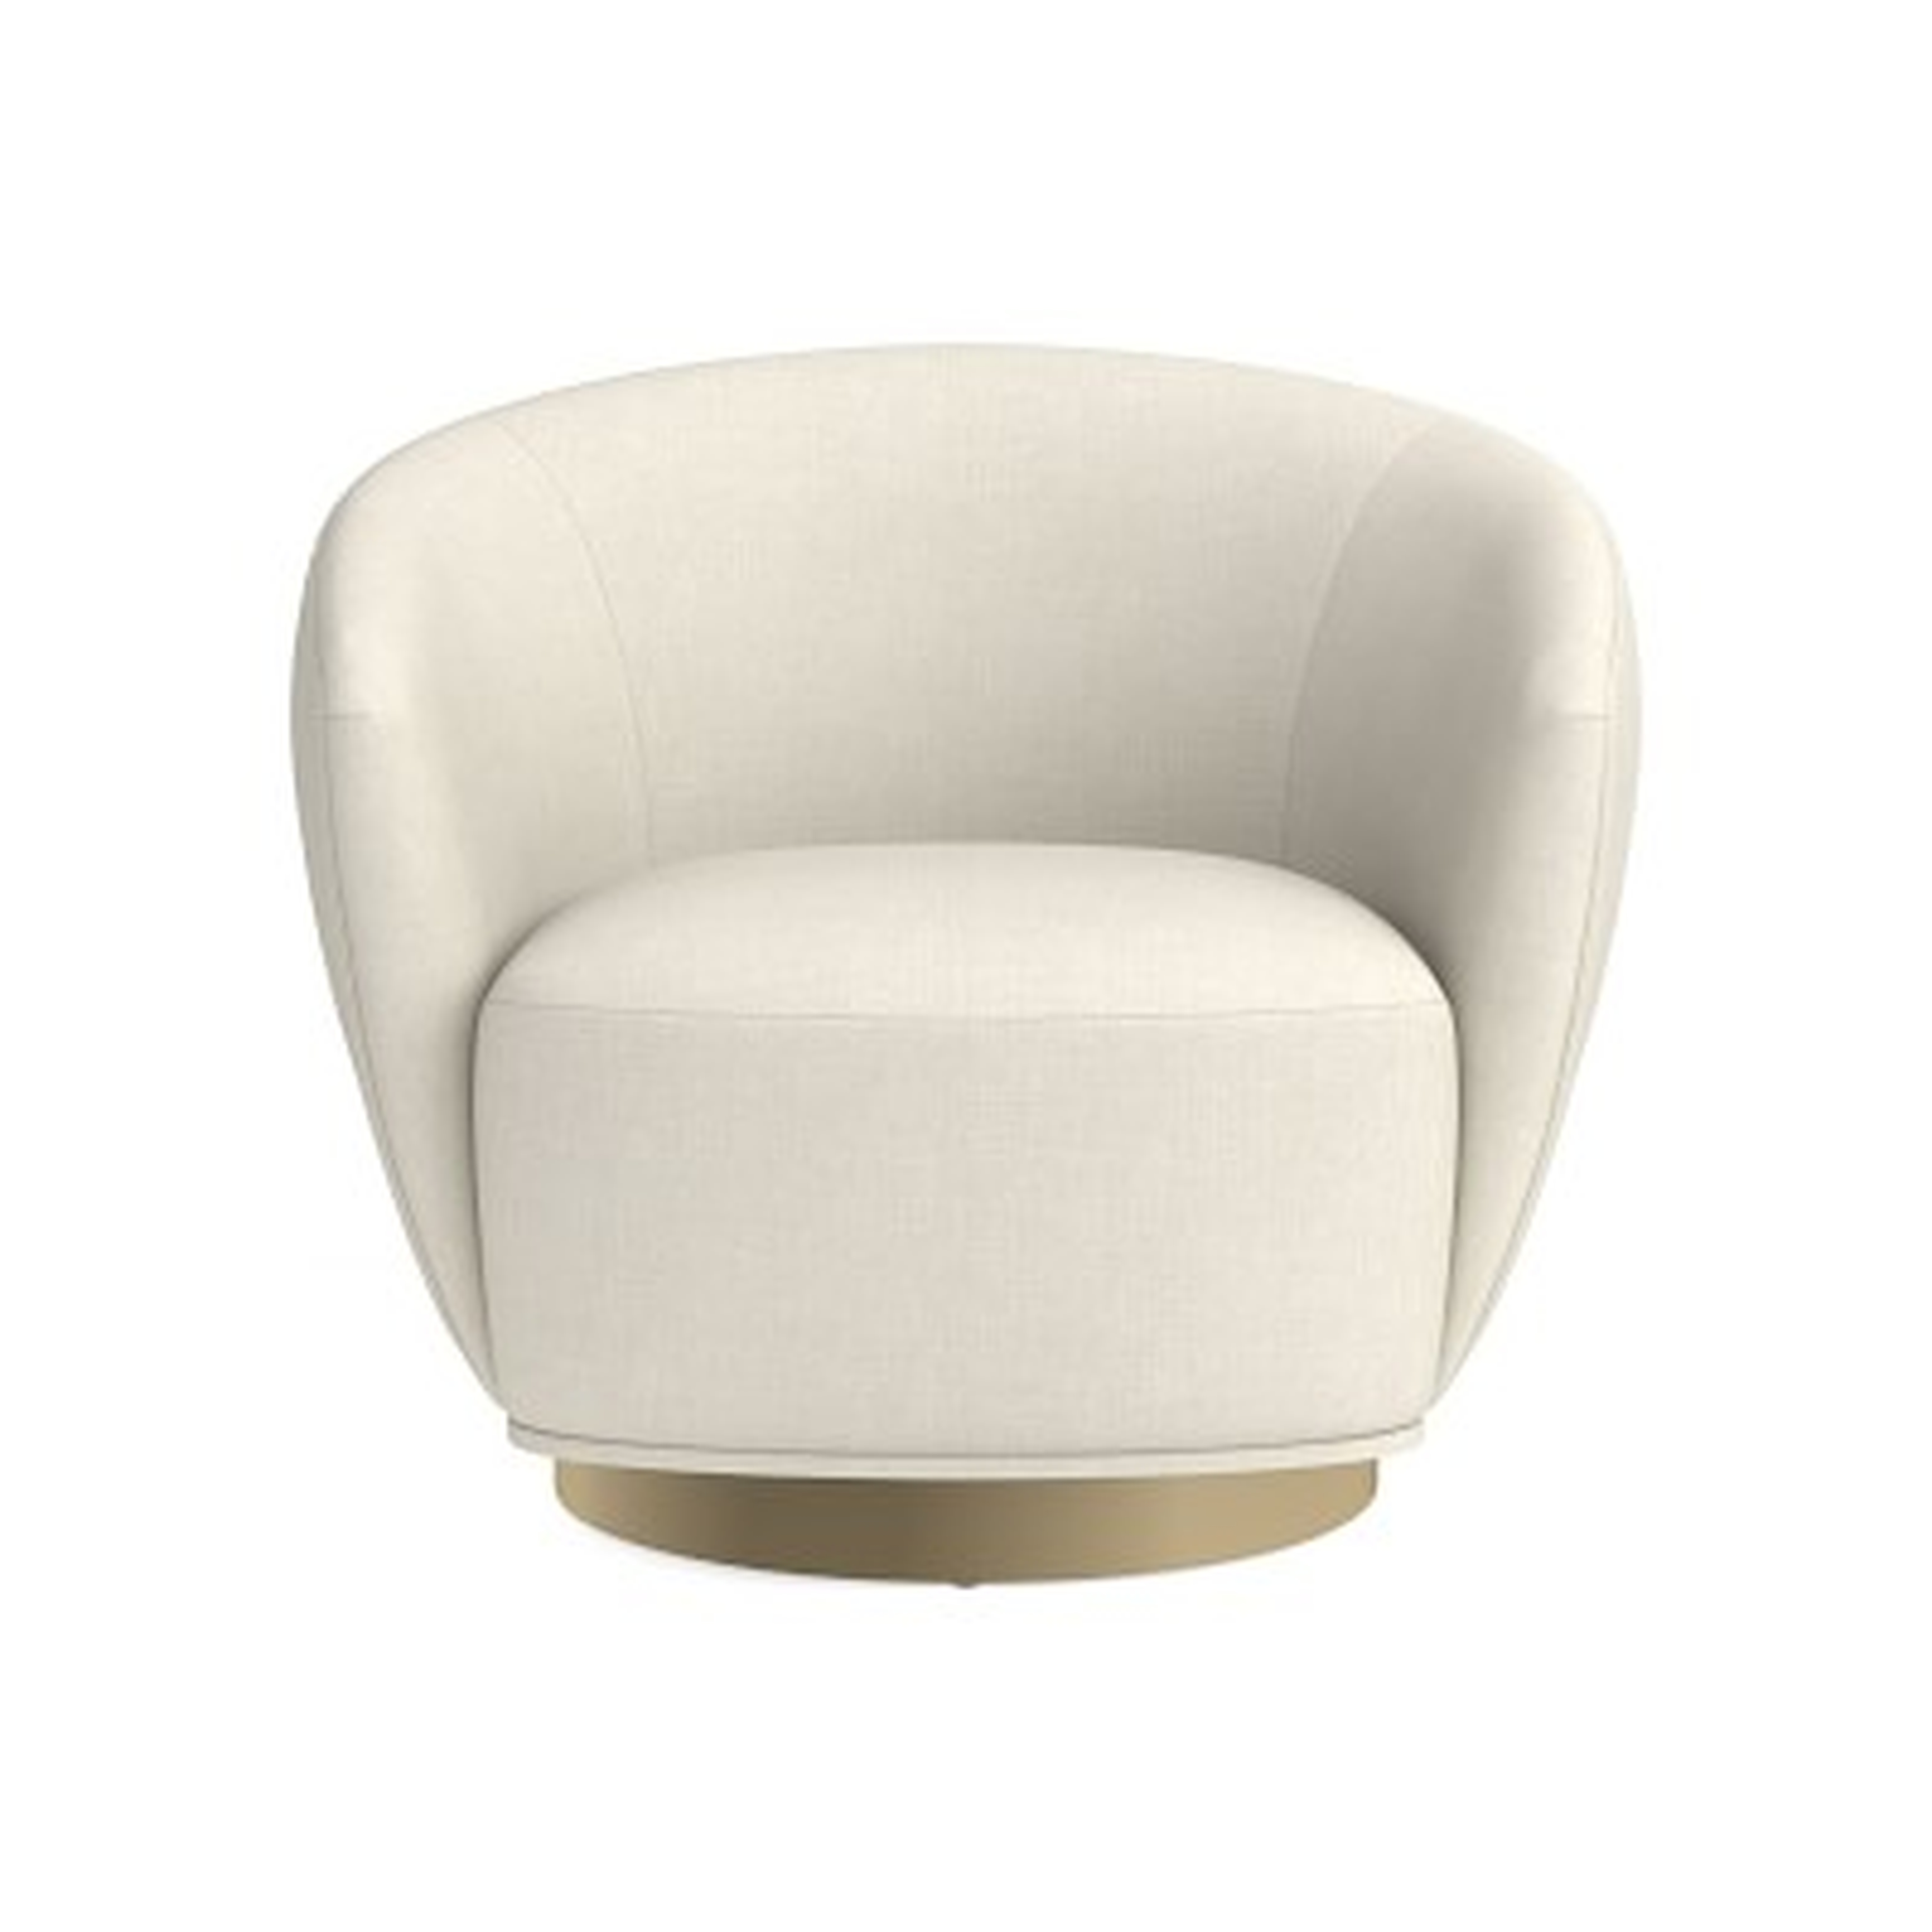 Alexis Swivel Chair, Performance Linen Blend, Ivory, Antique Brass - Williams Sonoma